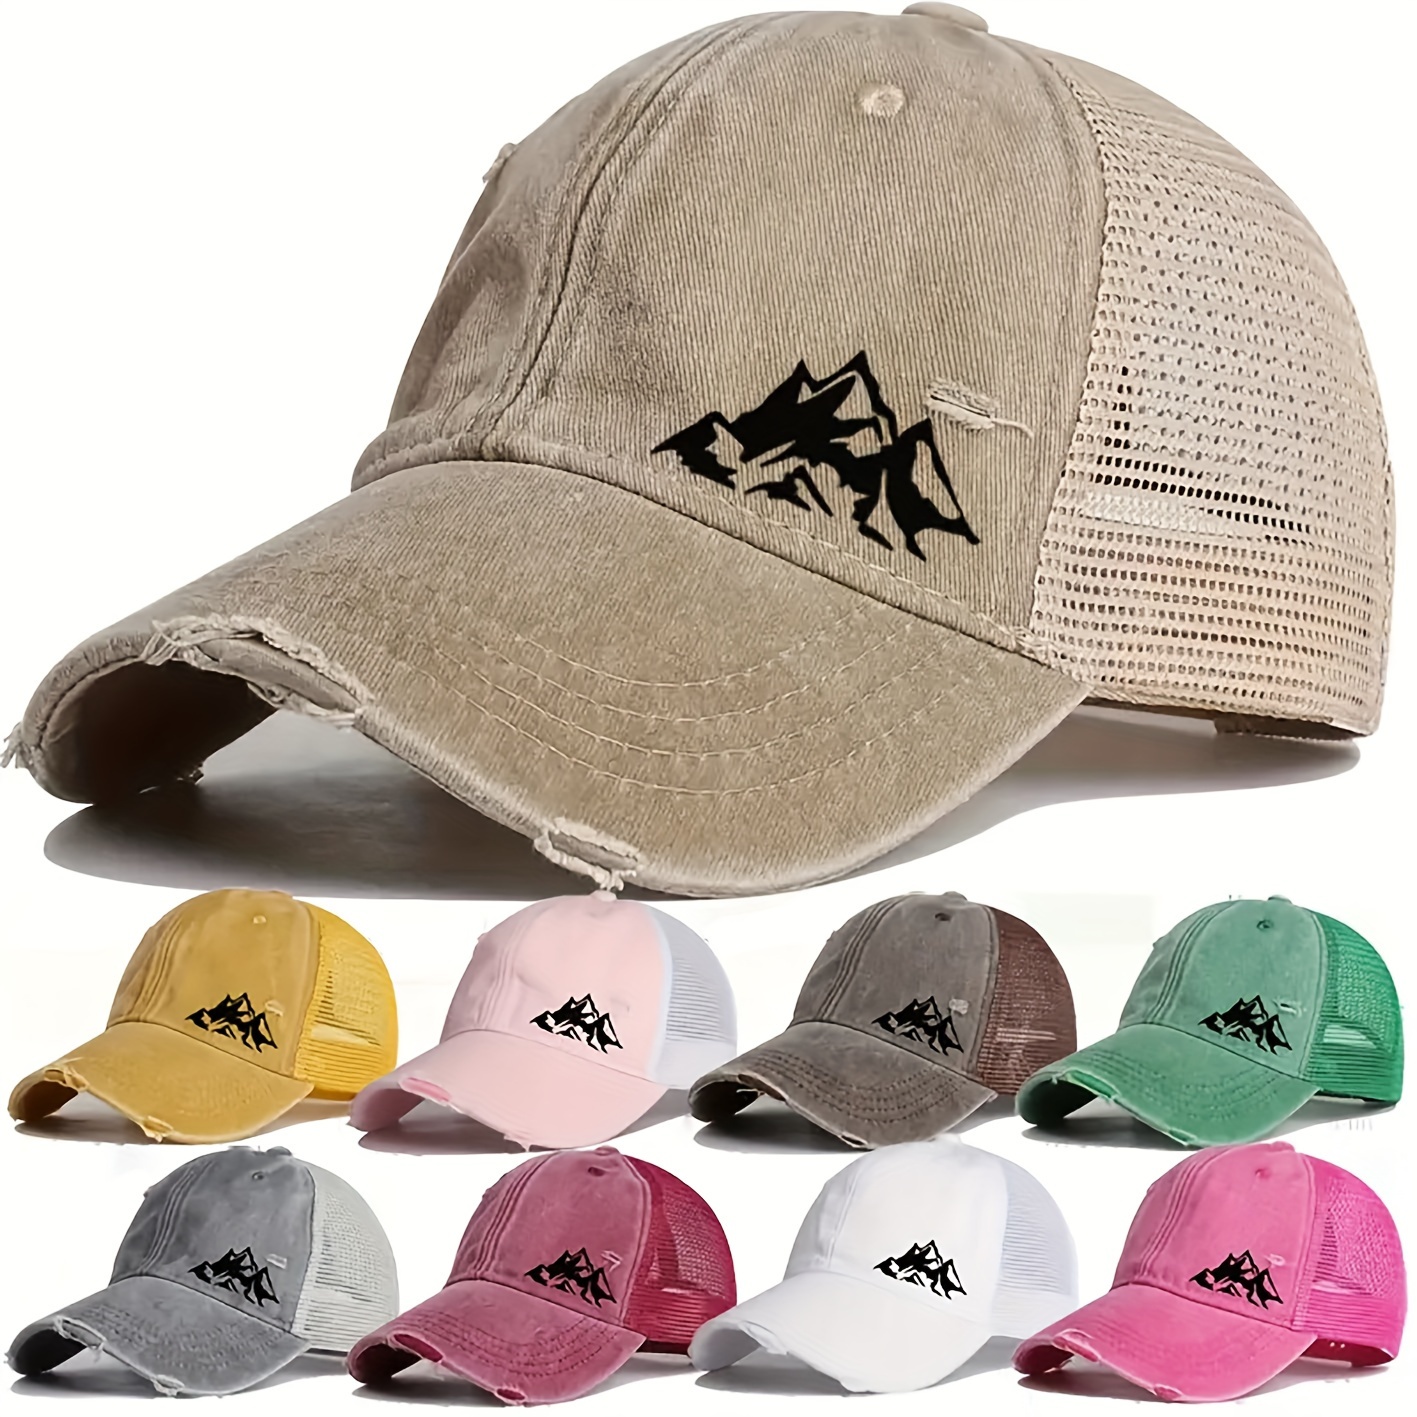 

1pc Unisex Sunshade Adjustable Baseball Cap With Hill Print Pattern For Outdoor Sport, Ideal Choice For Gifts